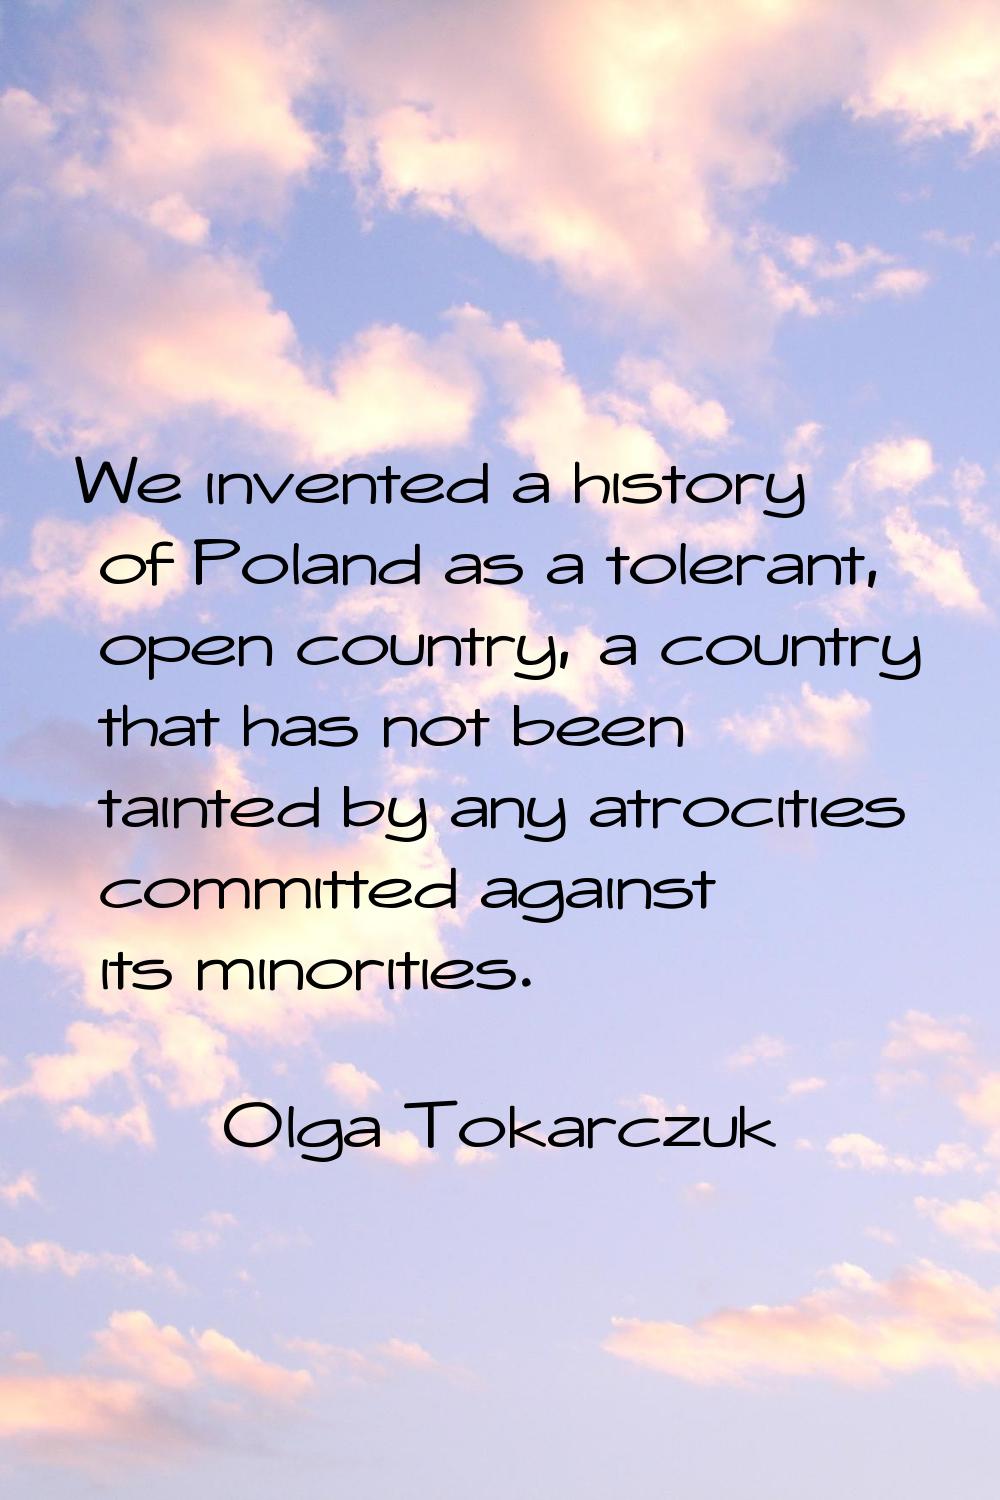 We invented a history of Poland as a tolerant, open country, a country that has not been tainted by